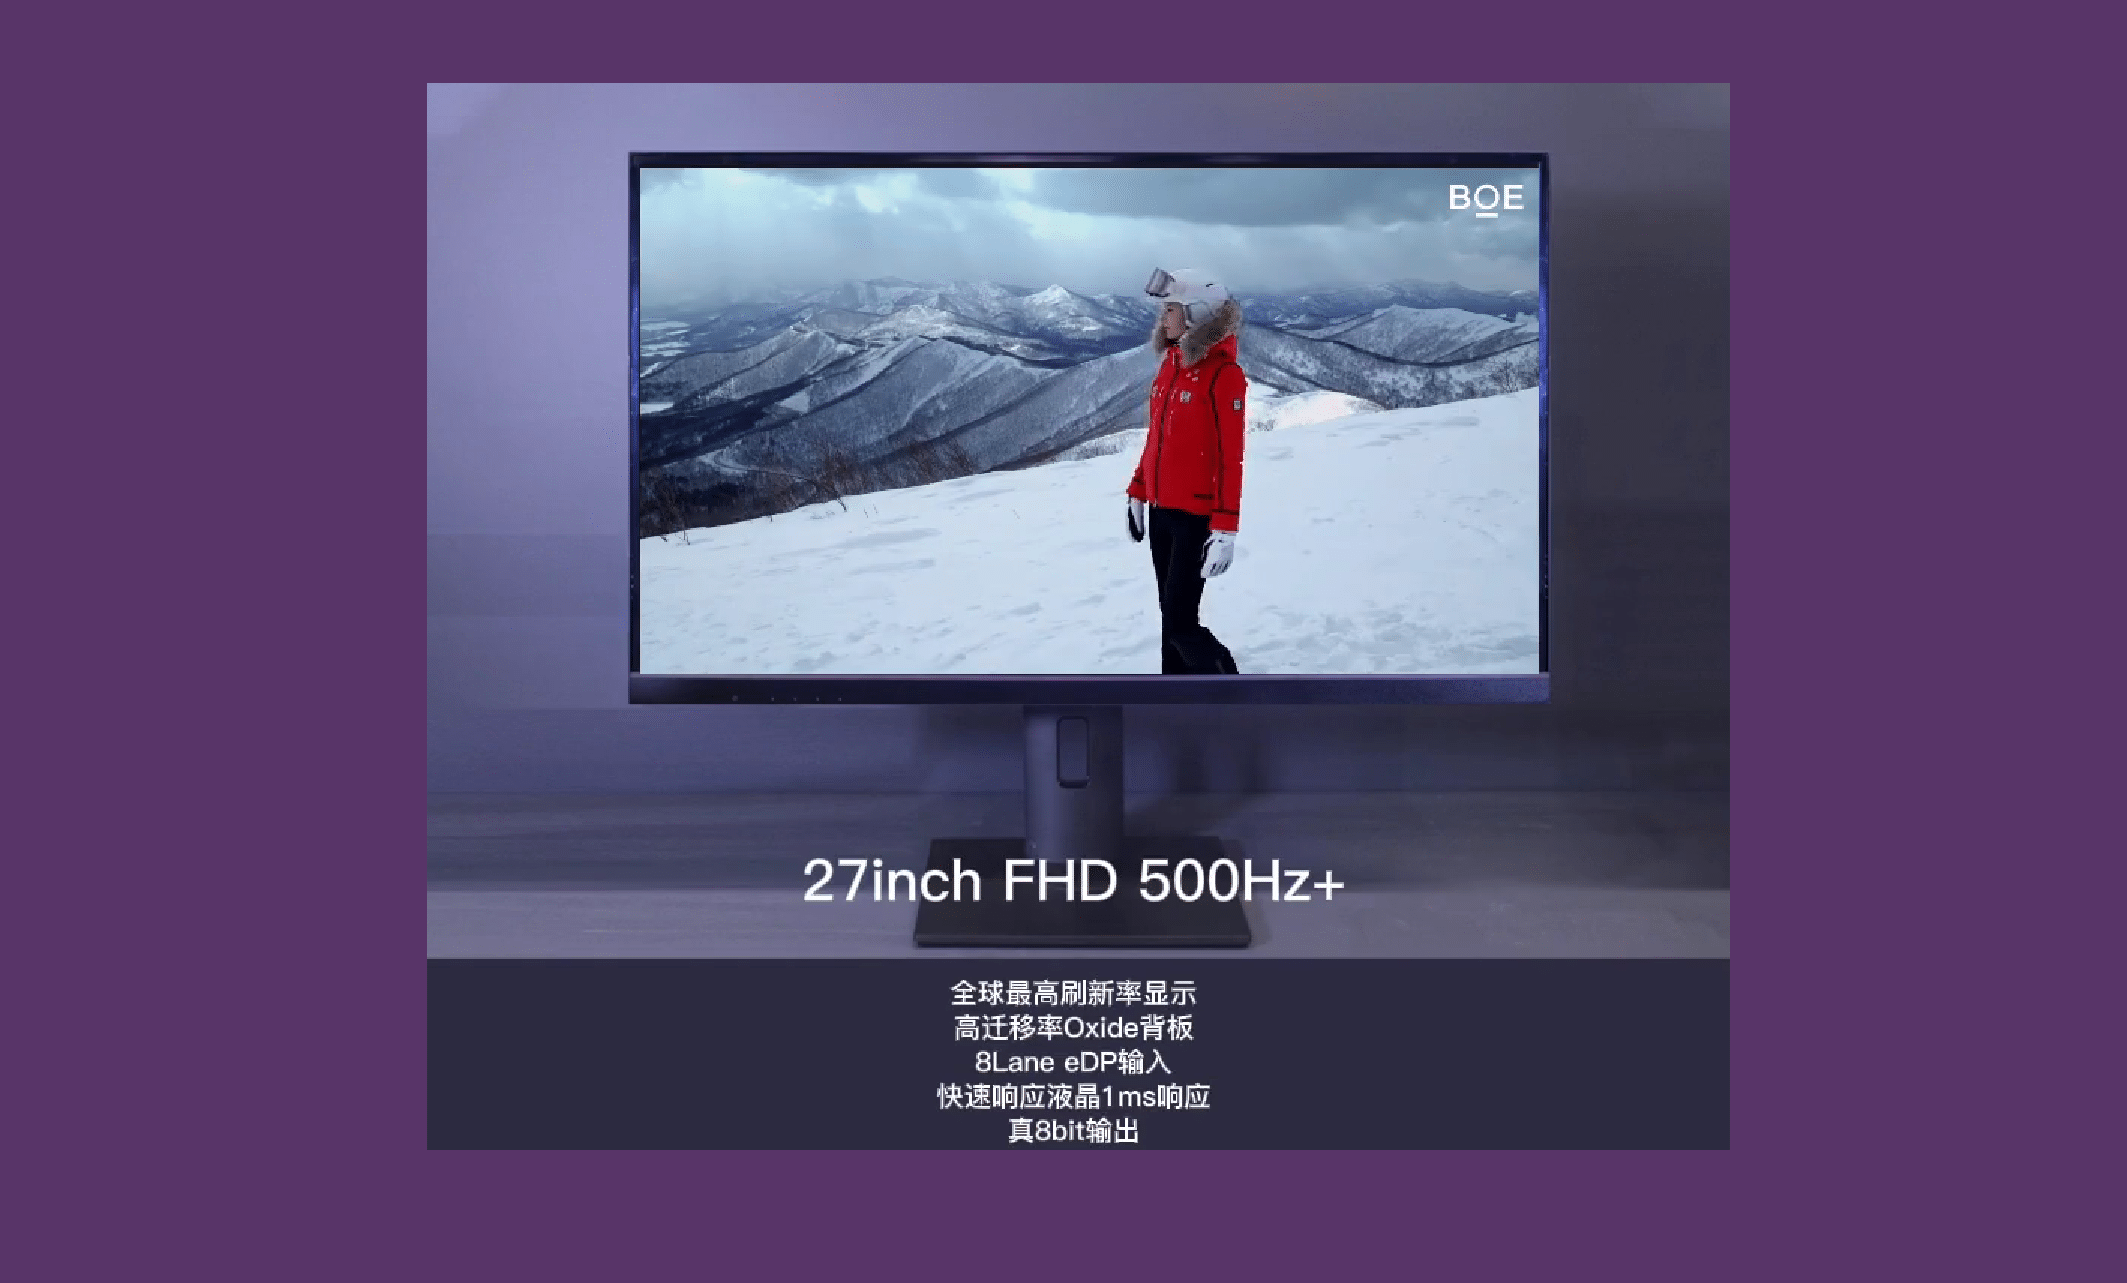 Full HD at 27 inches - that's the dedication to the fastest monitor in the world